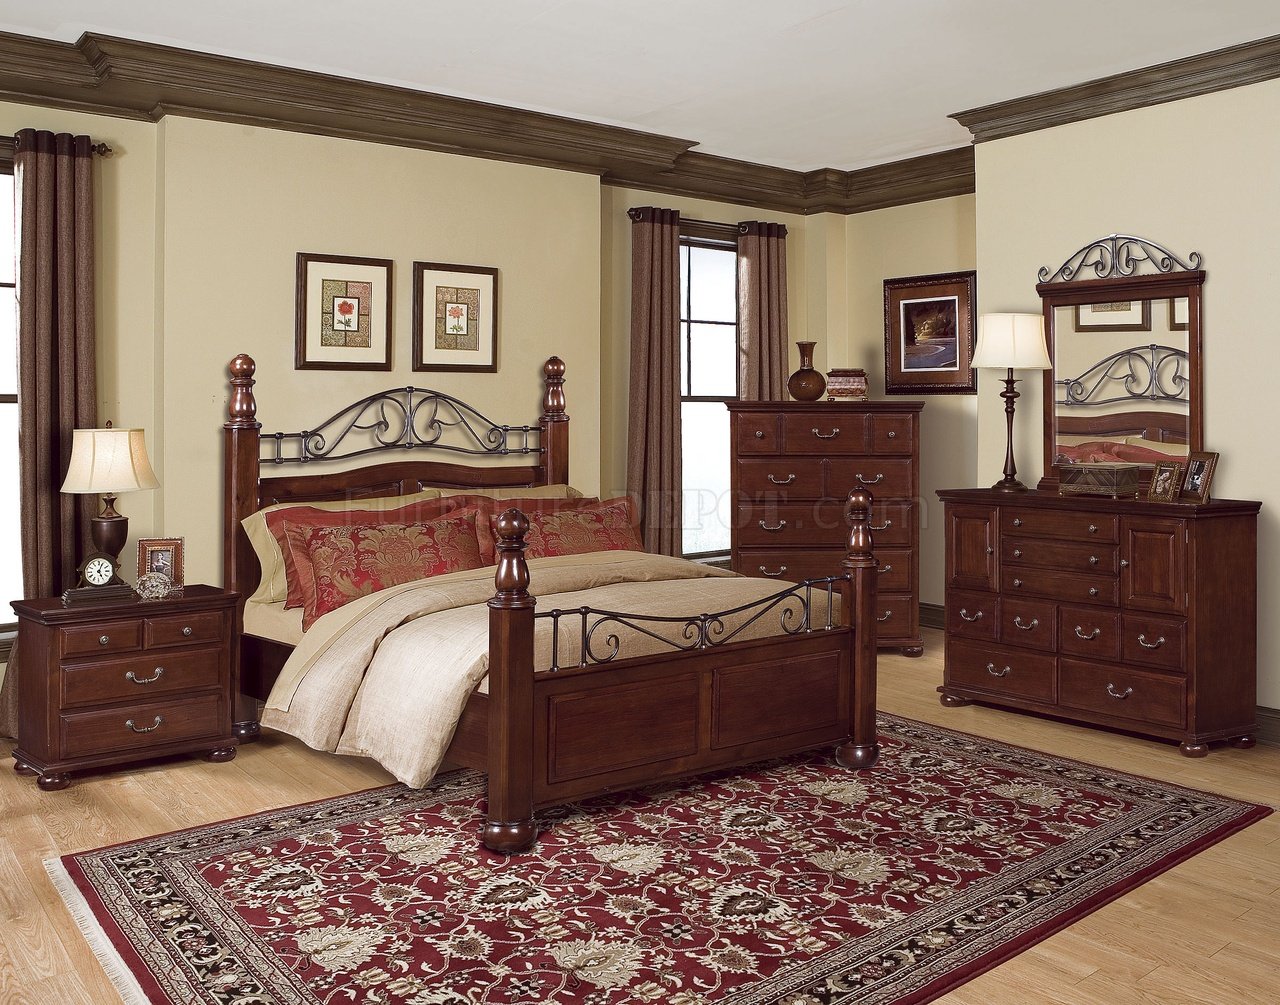 Rich Cherry Classic Bedroom w/Scrolling Metal Decorative Details - Click Image to Close